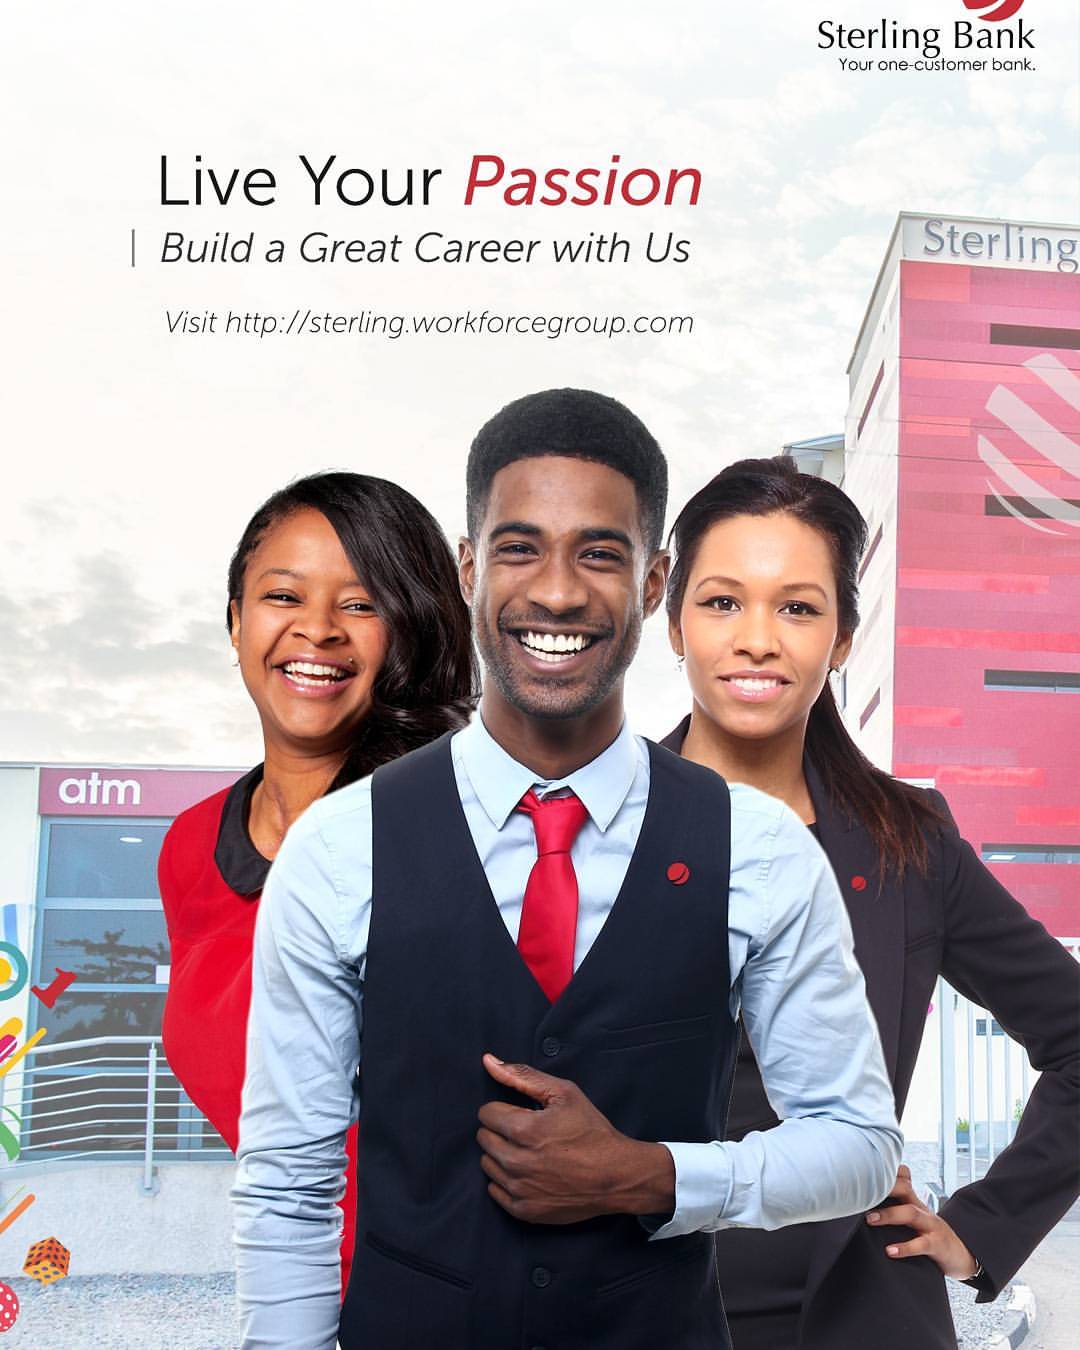 Then join the Sterling Bank Graduate Trainee Program 2018